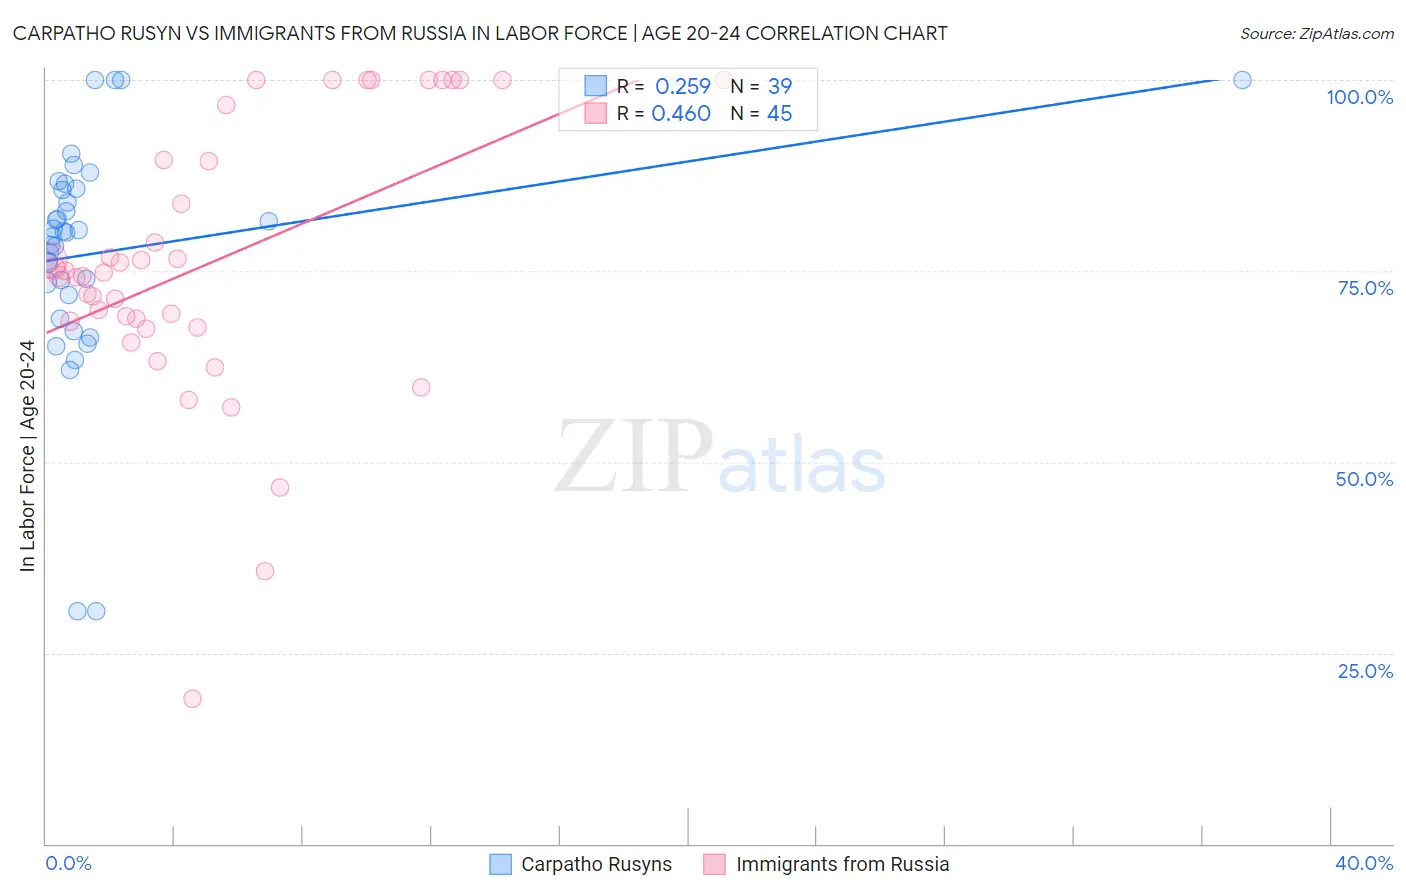 Carpatho Rusyn vs Immigrants from Russia In Labor Force | Age 20-24